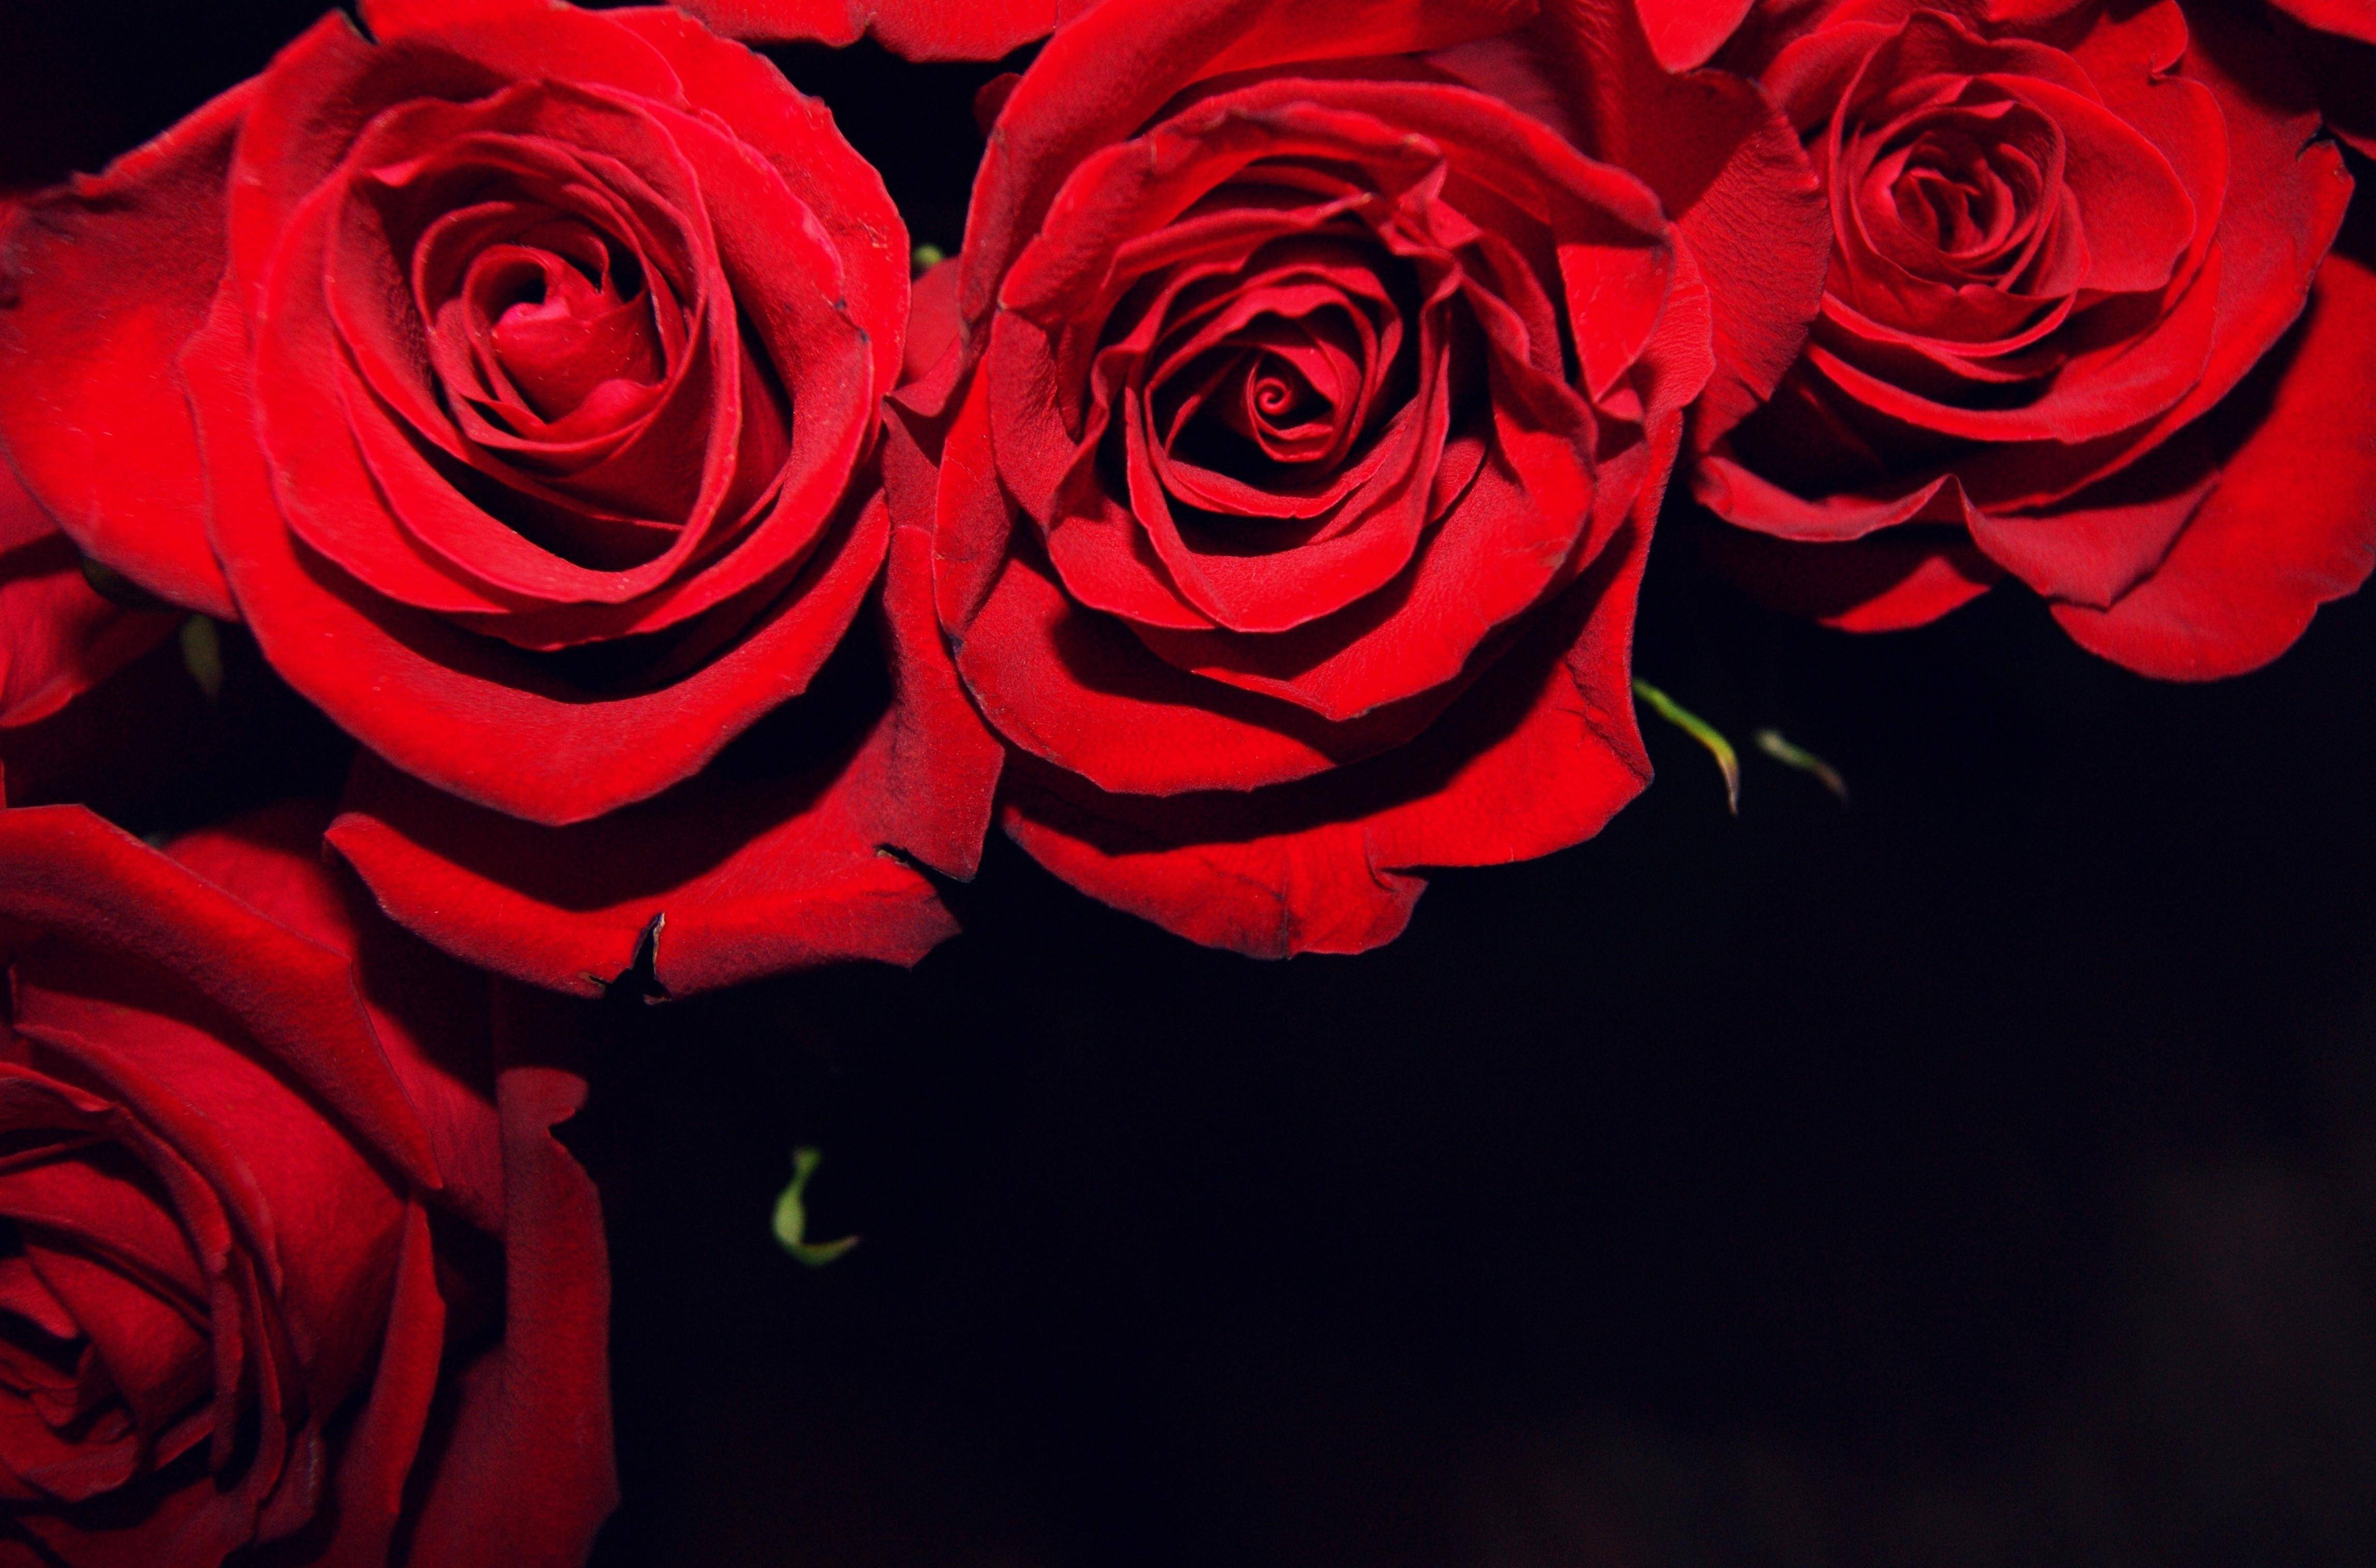 Red Roses On Black Backgrounds - Wallpaper Cave